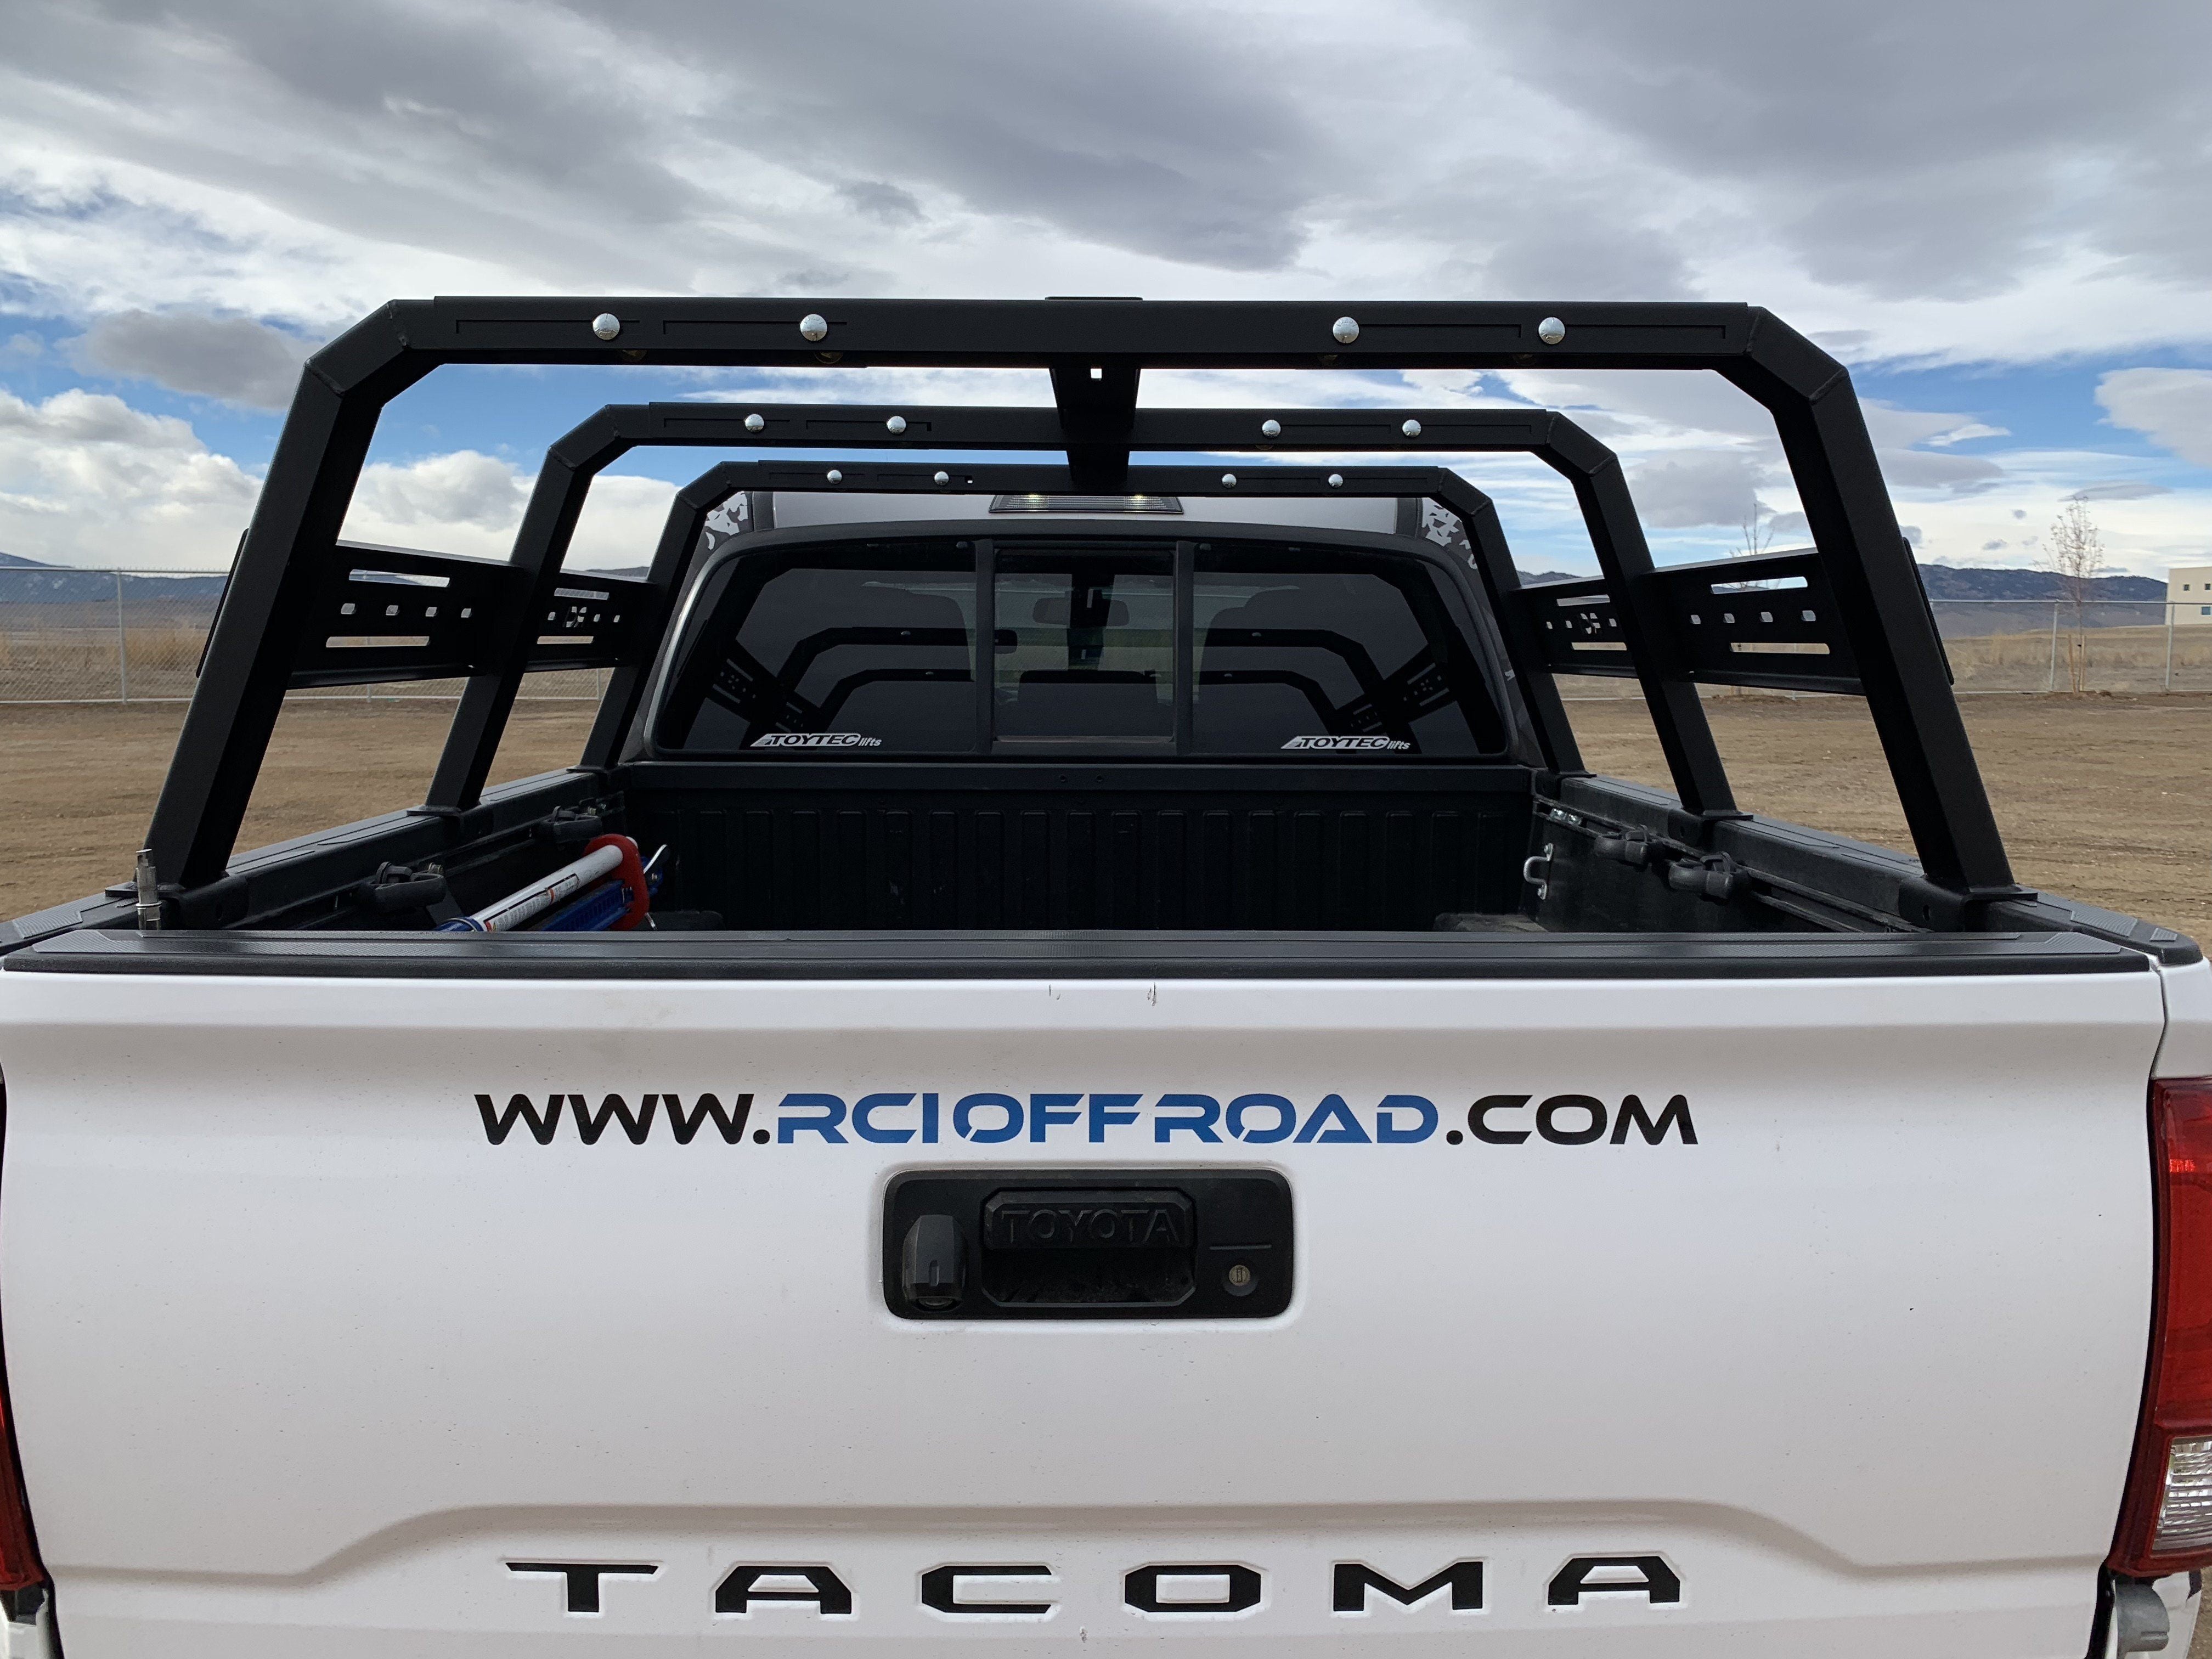 18" HD Bed Rack Bed Rack RCI Off Road (back view)